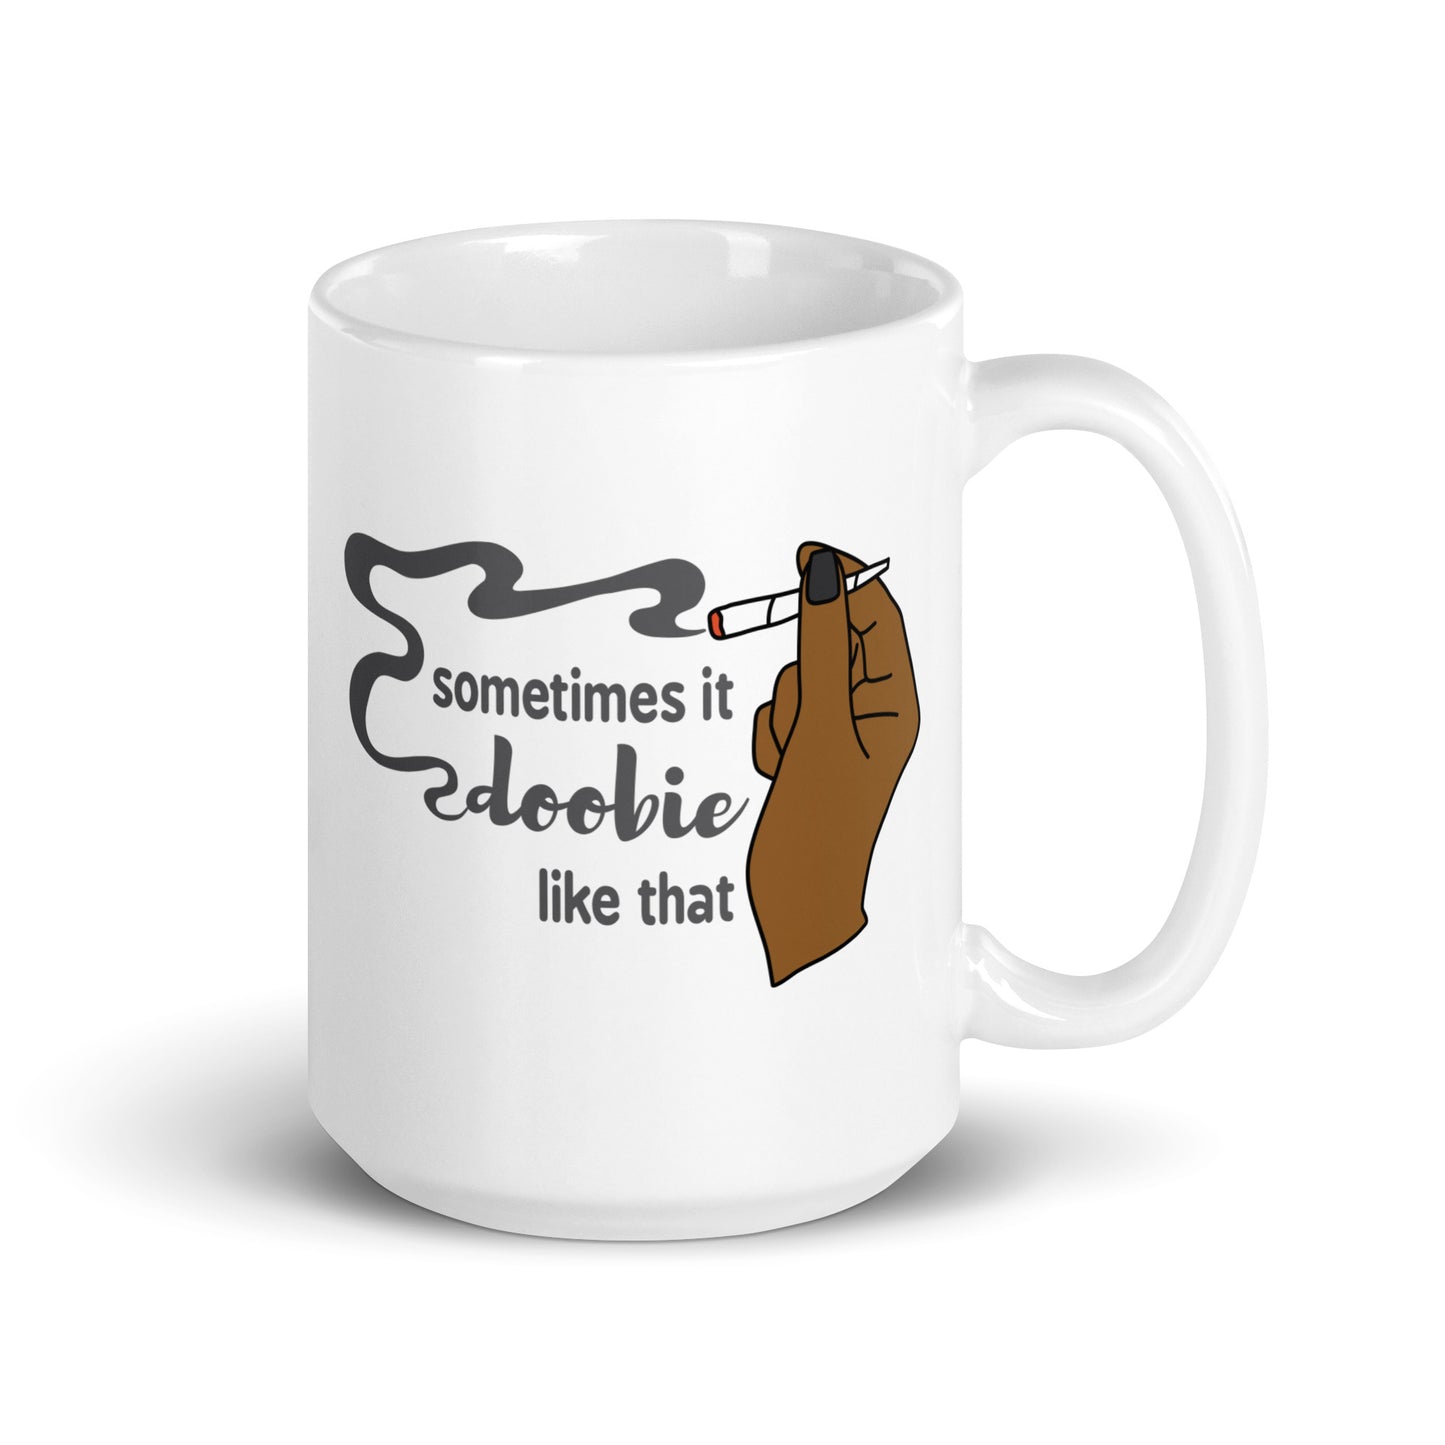 A white 15 ounce coffee mug featuring an illustration of a hand holding a smoking joint. Text alongside the hand reads "Sometimes it doobie like that" with the word "doobie" made of smoke from the joint.